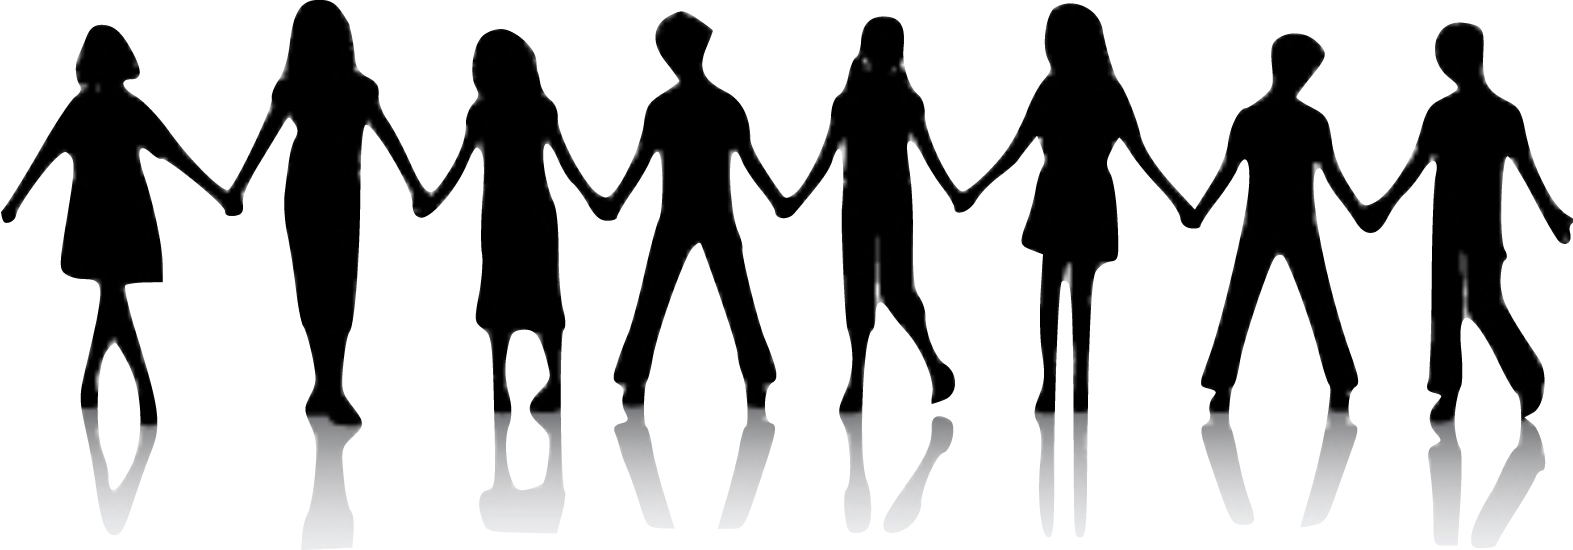 Silhouette meeting at getdrawings. Friendship clipart 5 friend